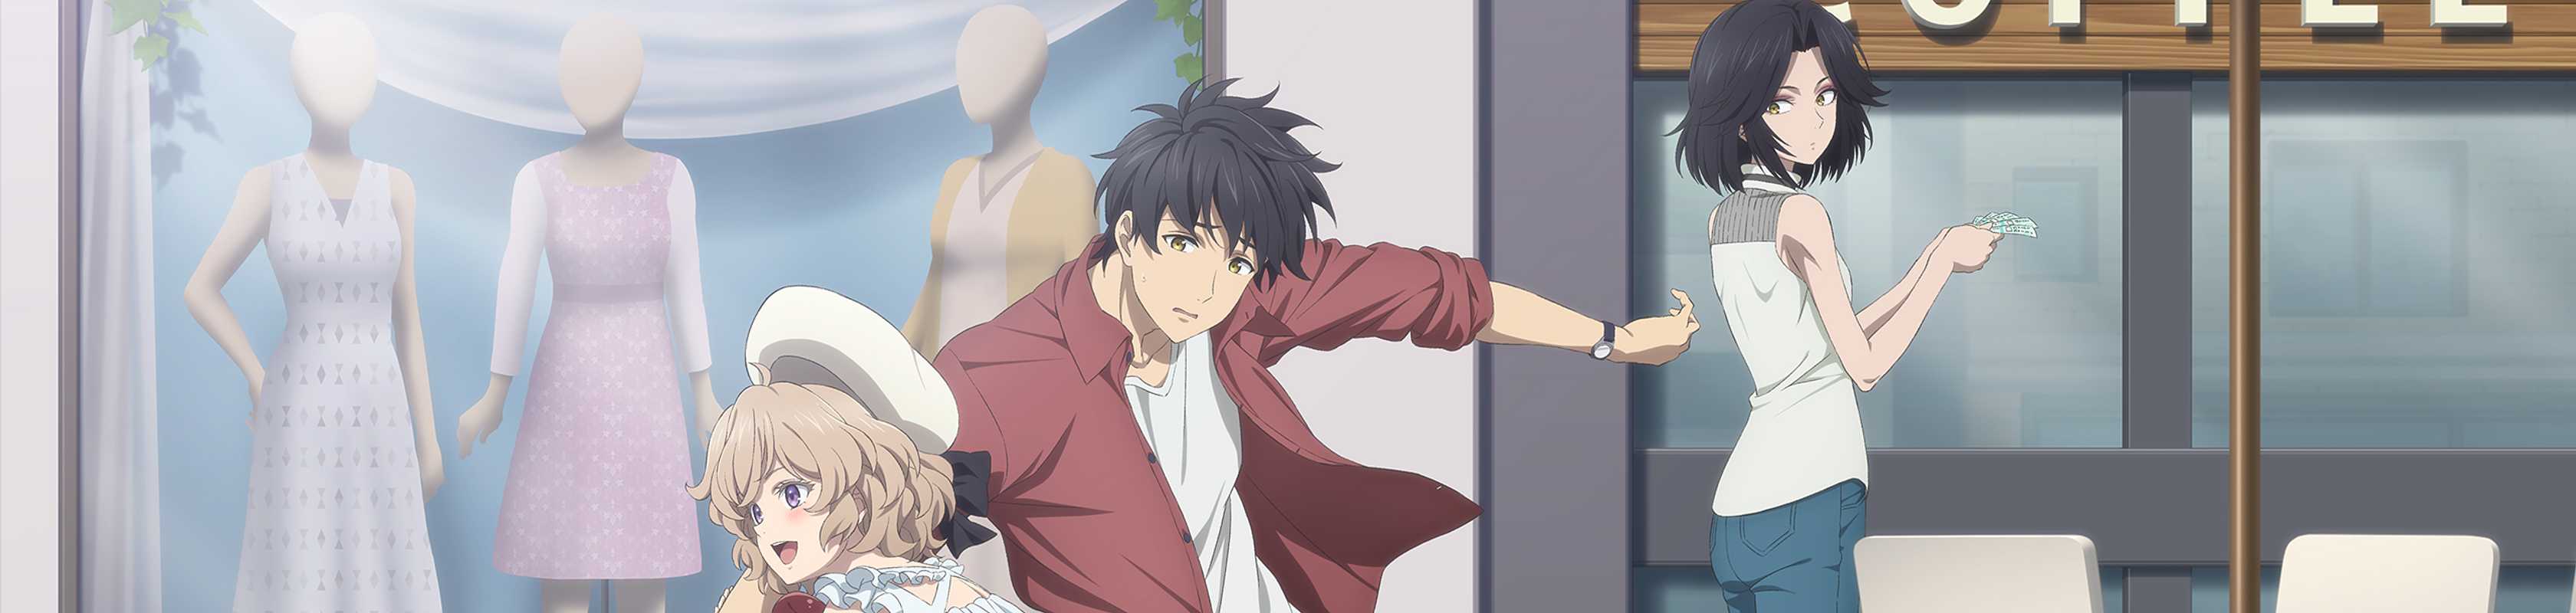 Kyokou Suiri Gallery - Anime Shelter  In spectre, Anime, Cute anime  character